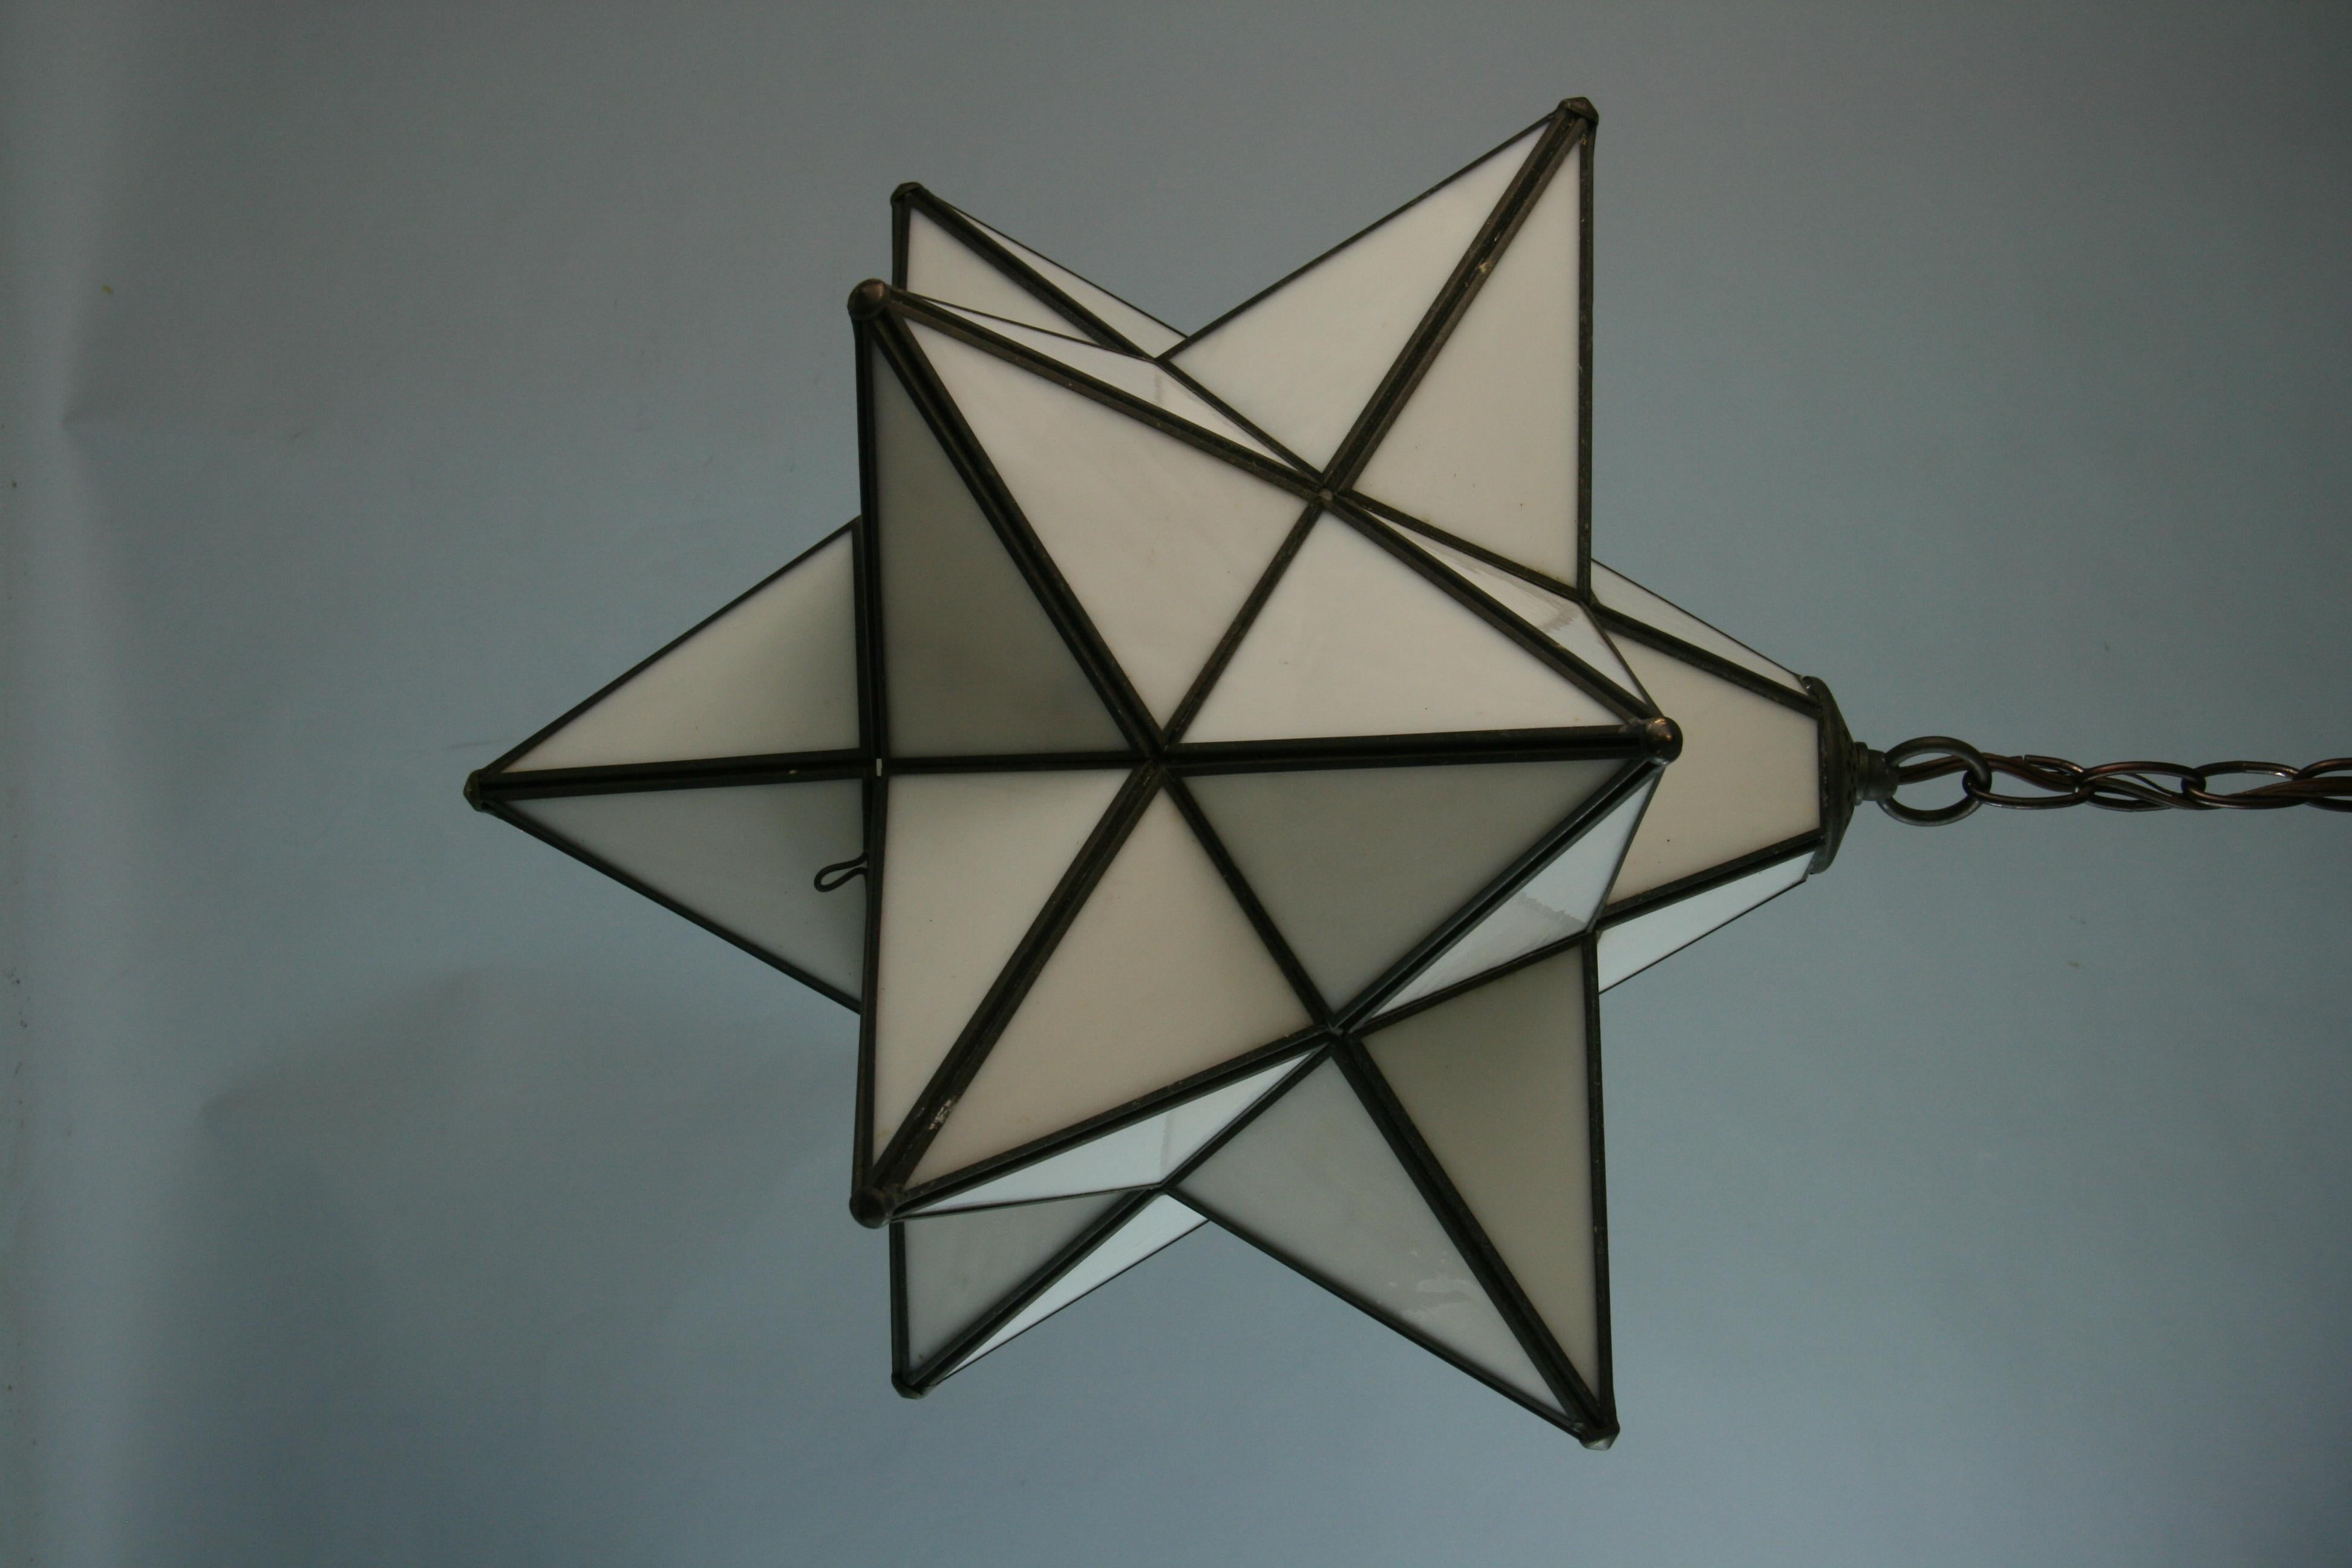 1506 French and crafted white glass star pendant
Takes one 60 watt max Edison based bulb
Supplied with 3 feet chain and canopy